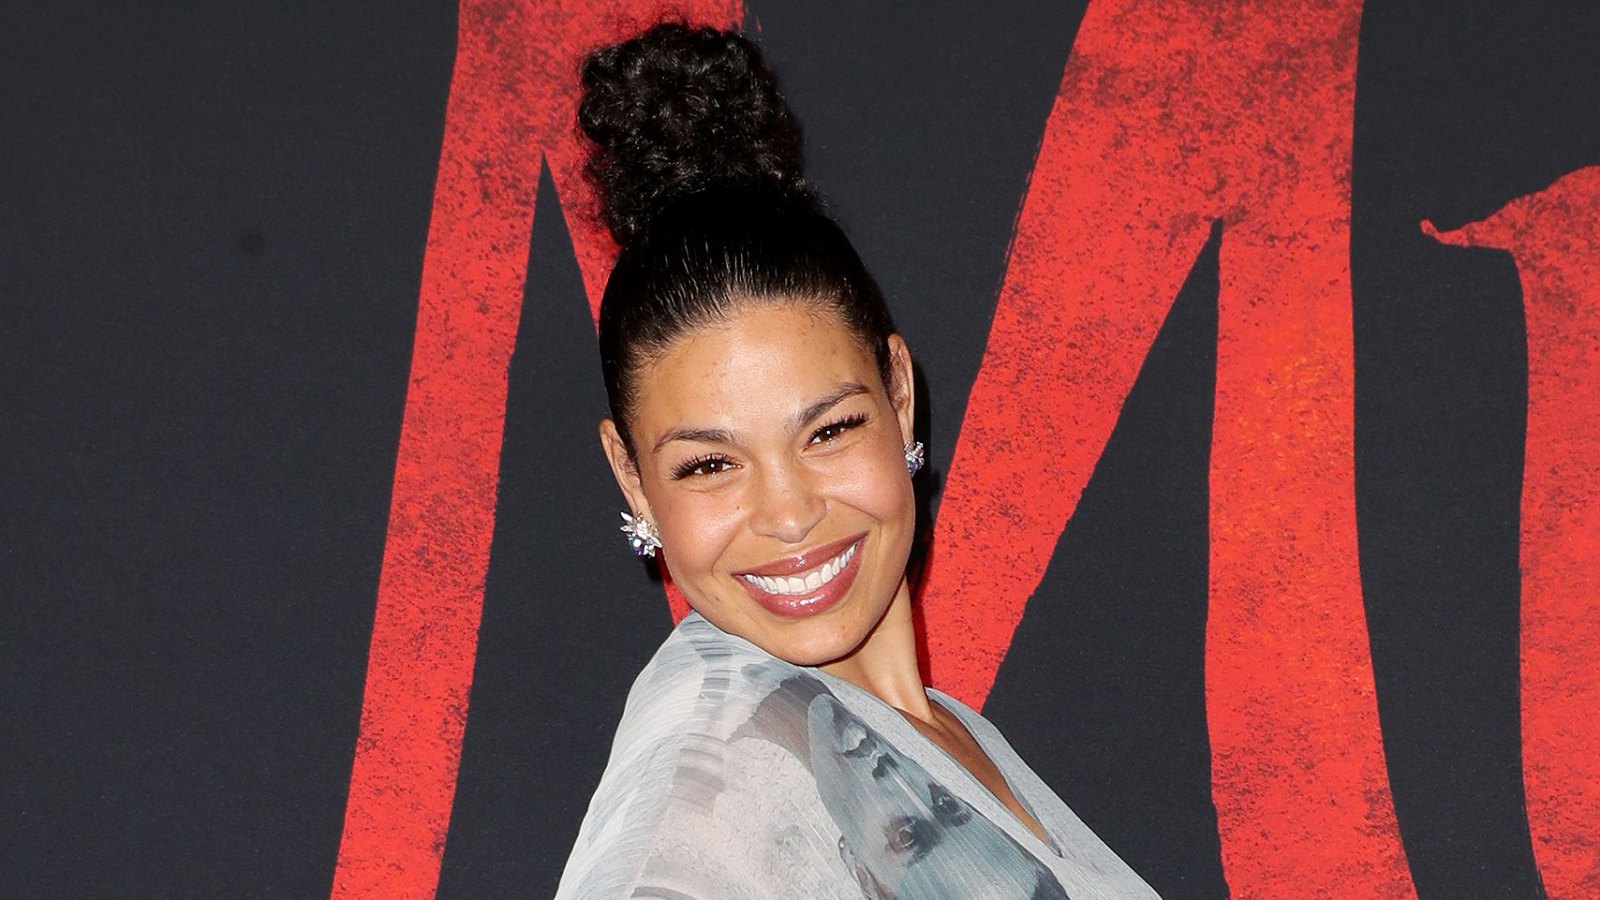 Jordin Sparks Says She’s a Big Fan of Baby Food